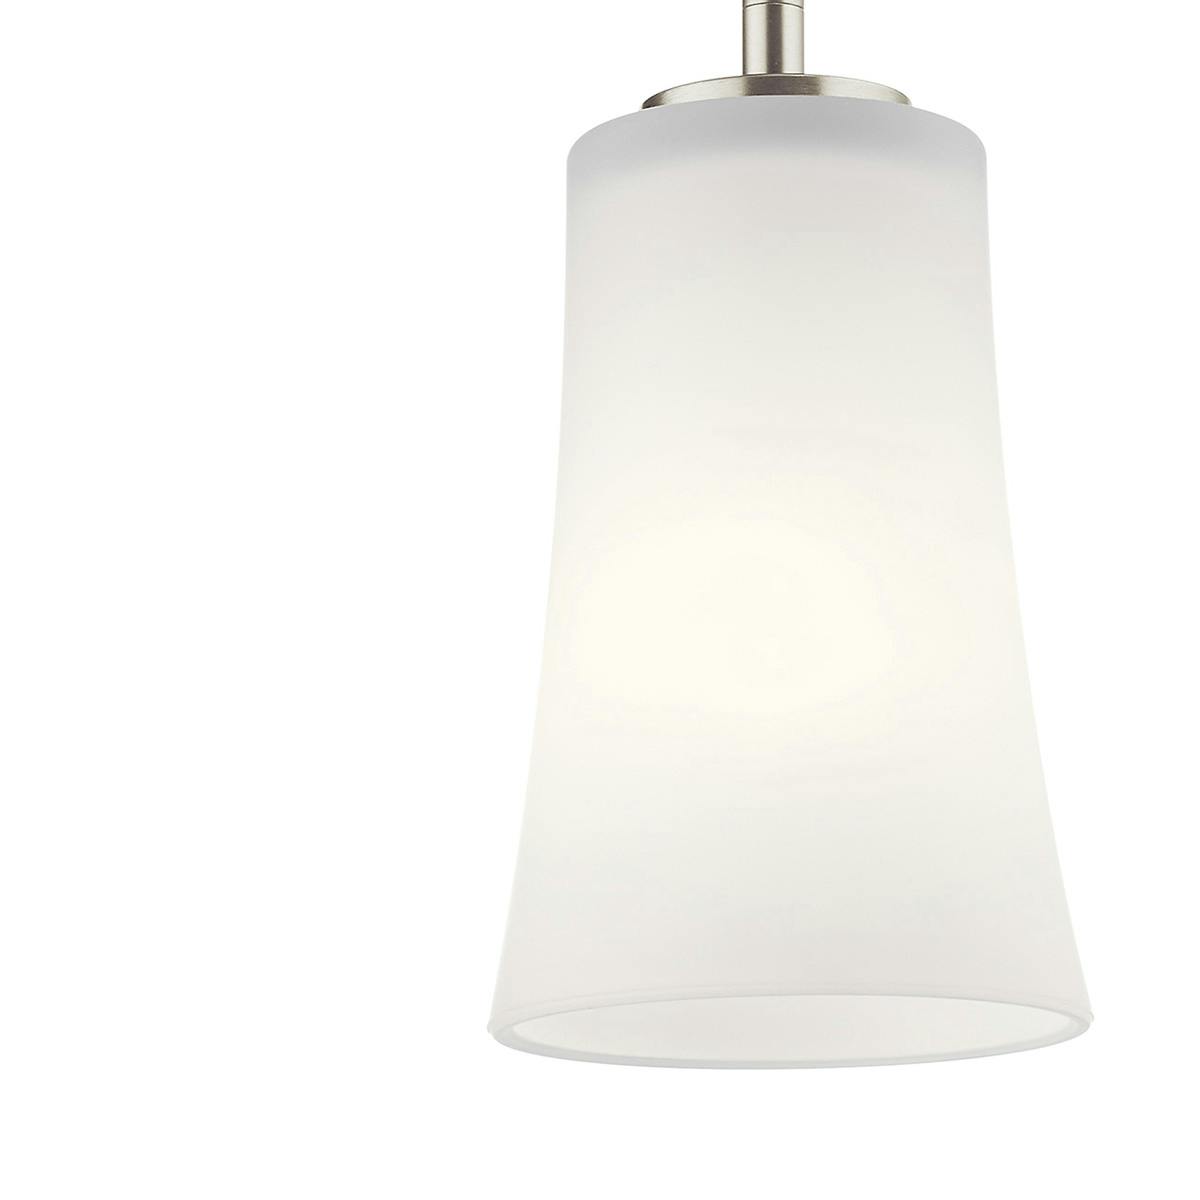 Close up view of the Armida 8" Mini Pendant Brushed Nickel on a white background